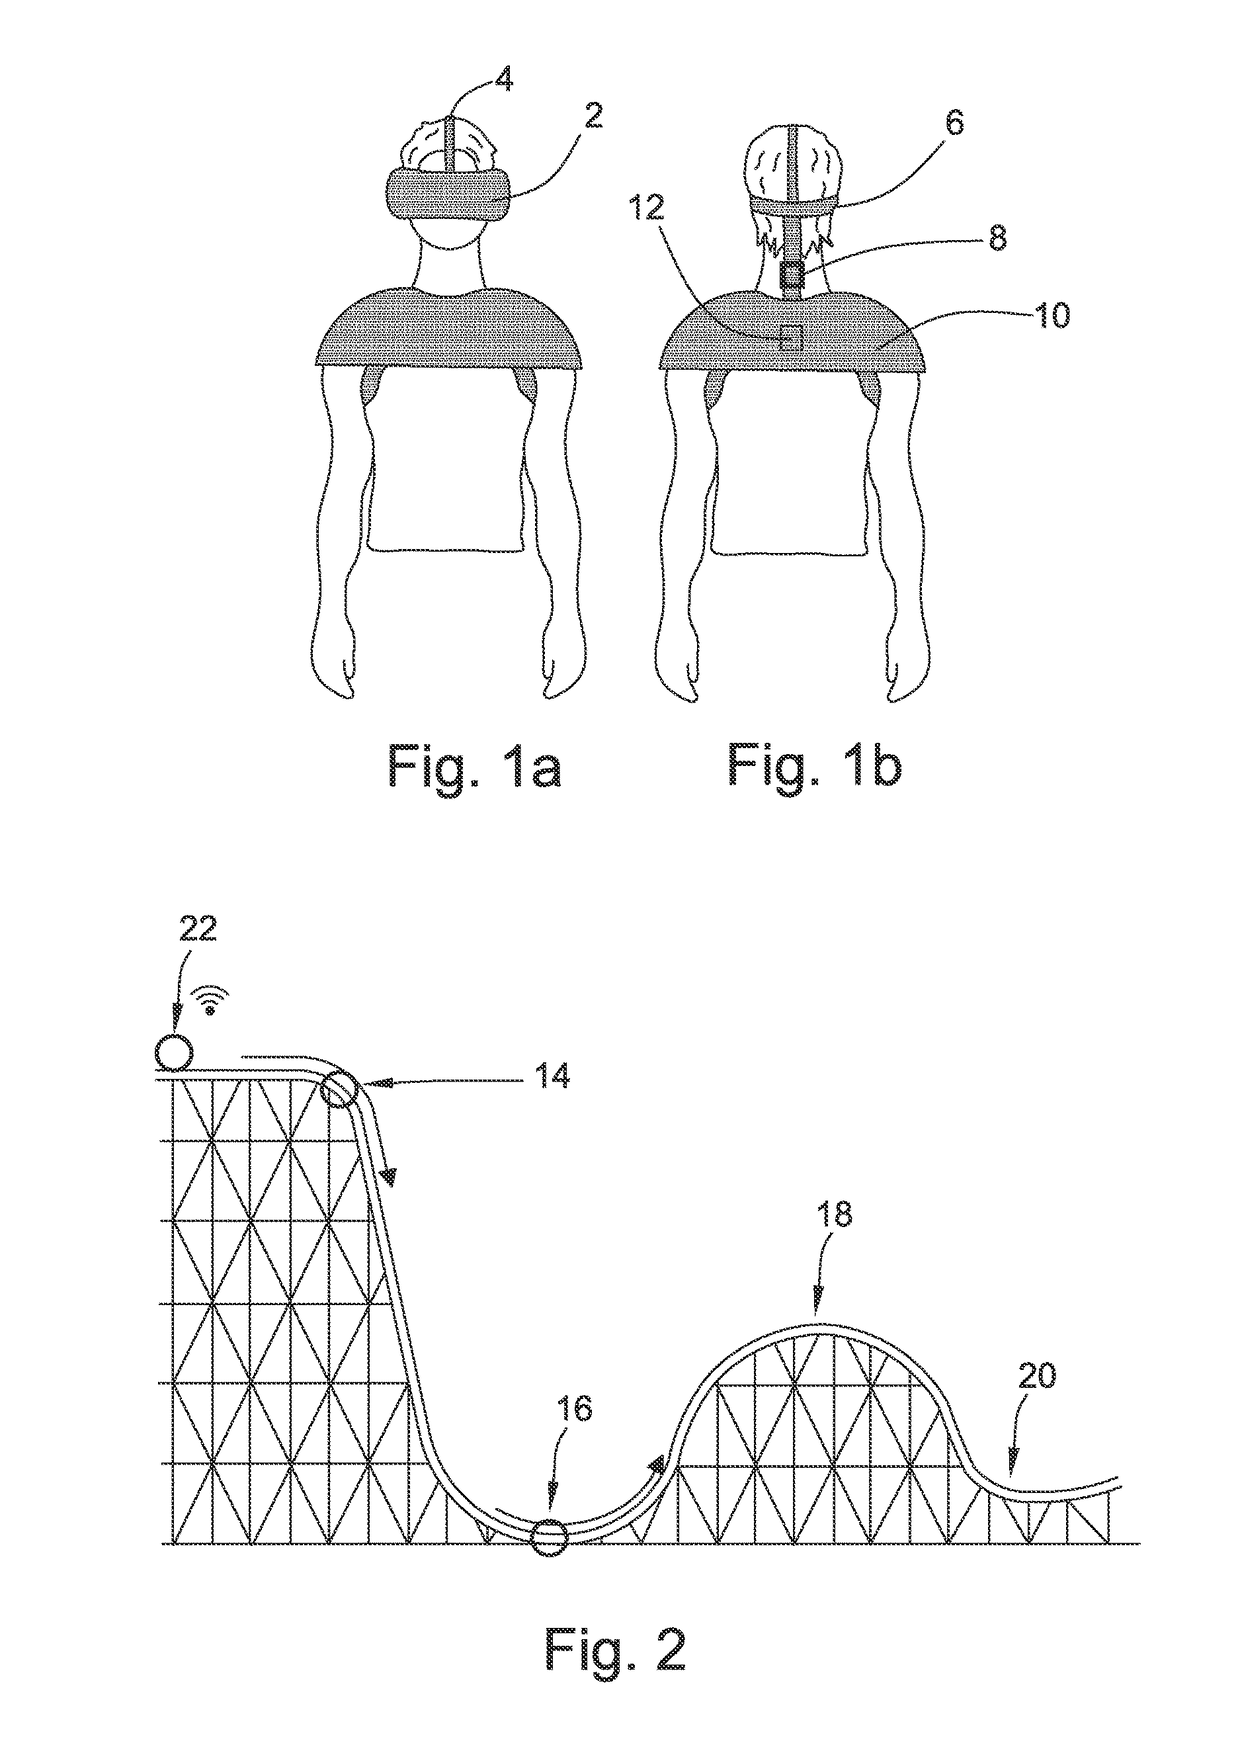 System for providing a virtual reality experience